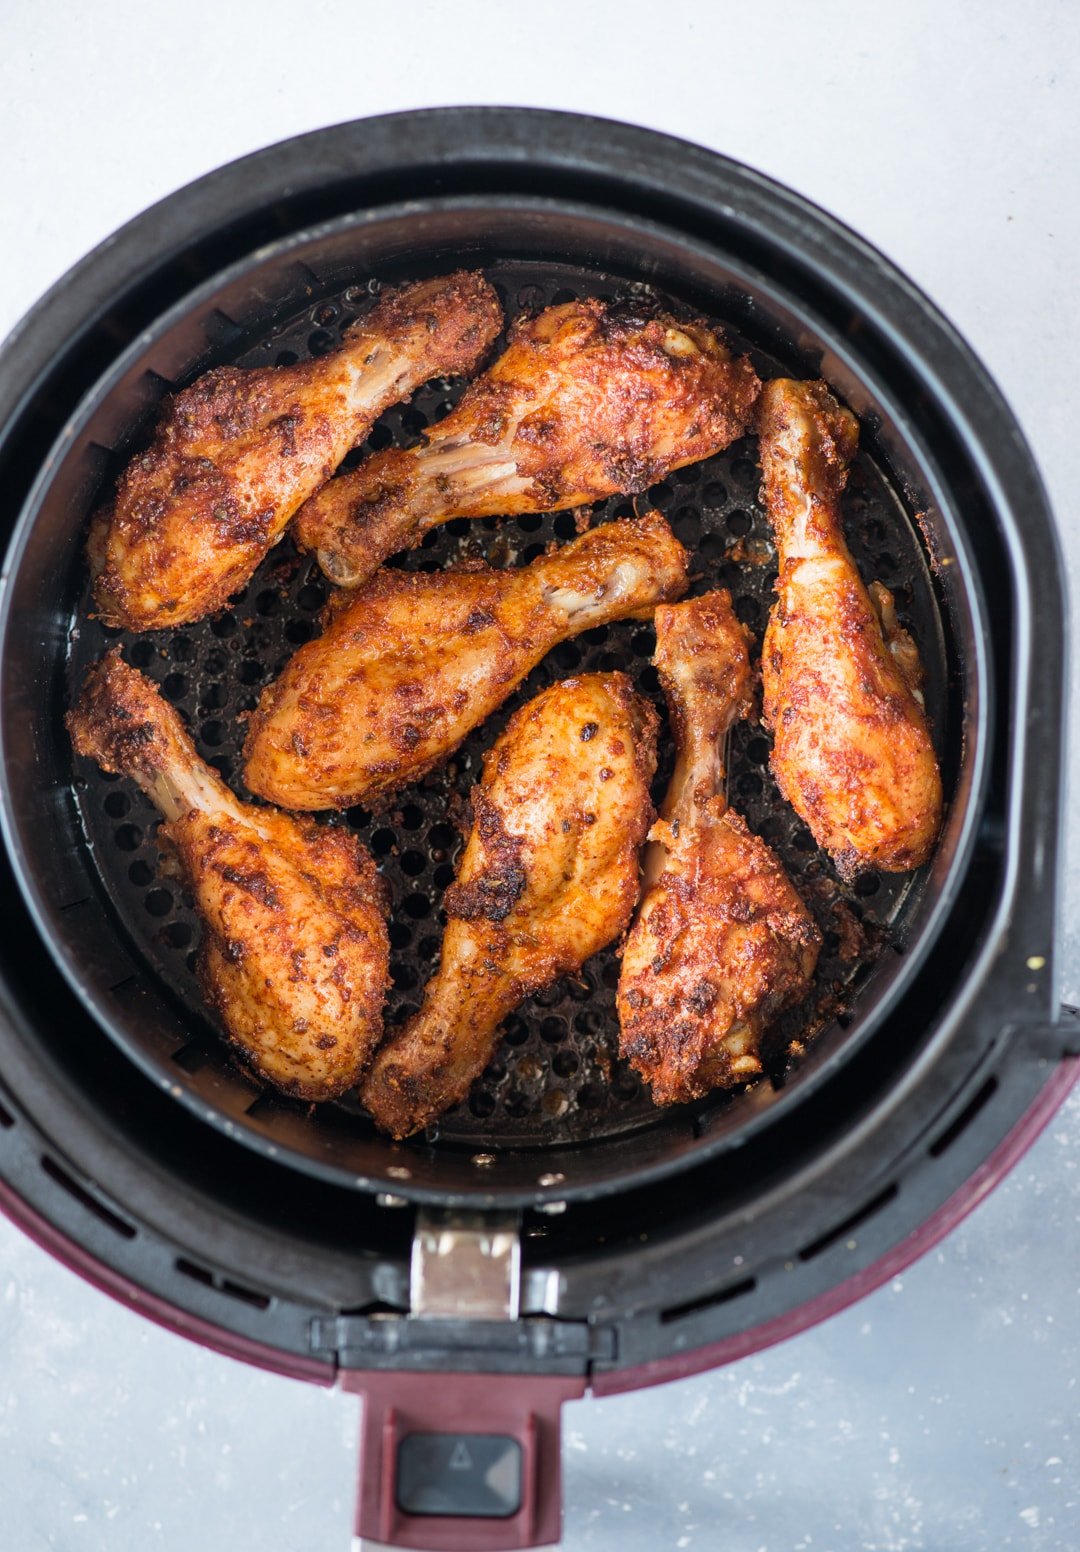 Air fryer chicken coated with a sweet and spicy dry rub is really juicy and as good as deep-fried version. This air fryer Chicken Recipe takes only 15 minutes to make.